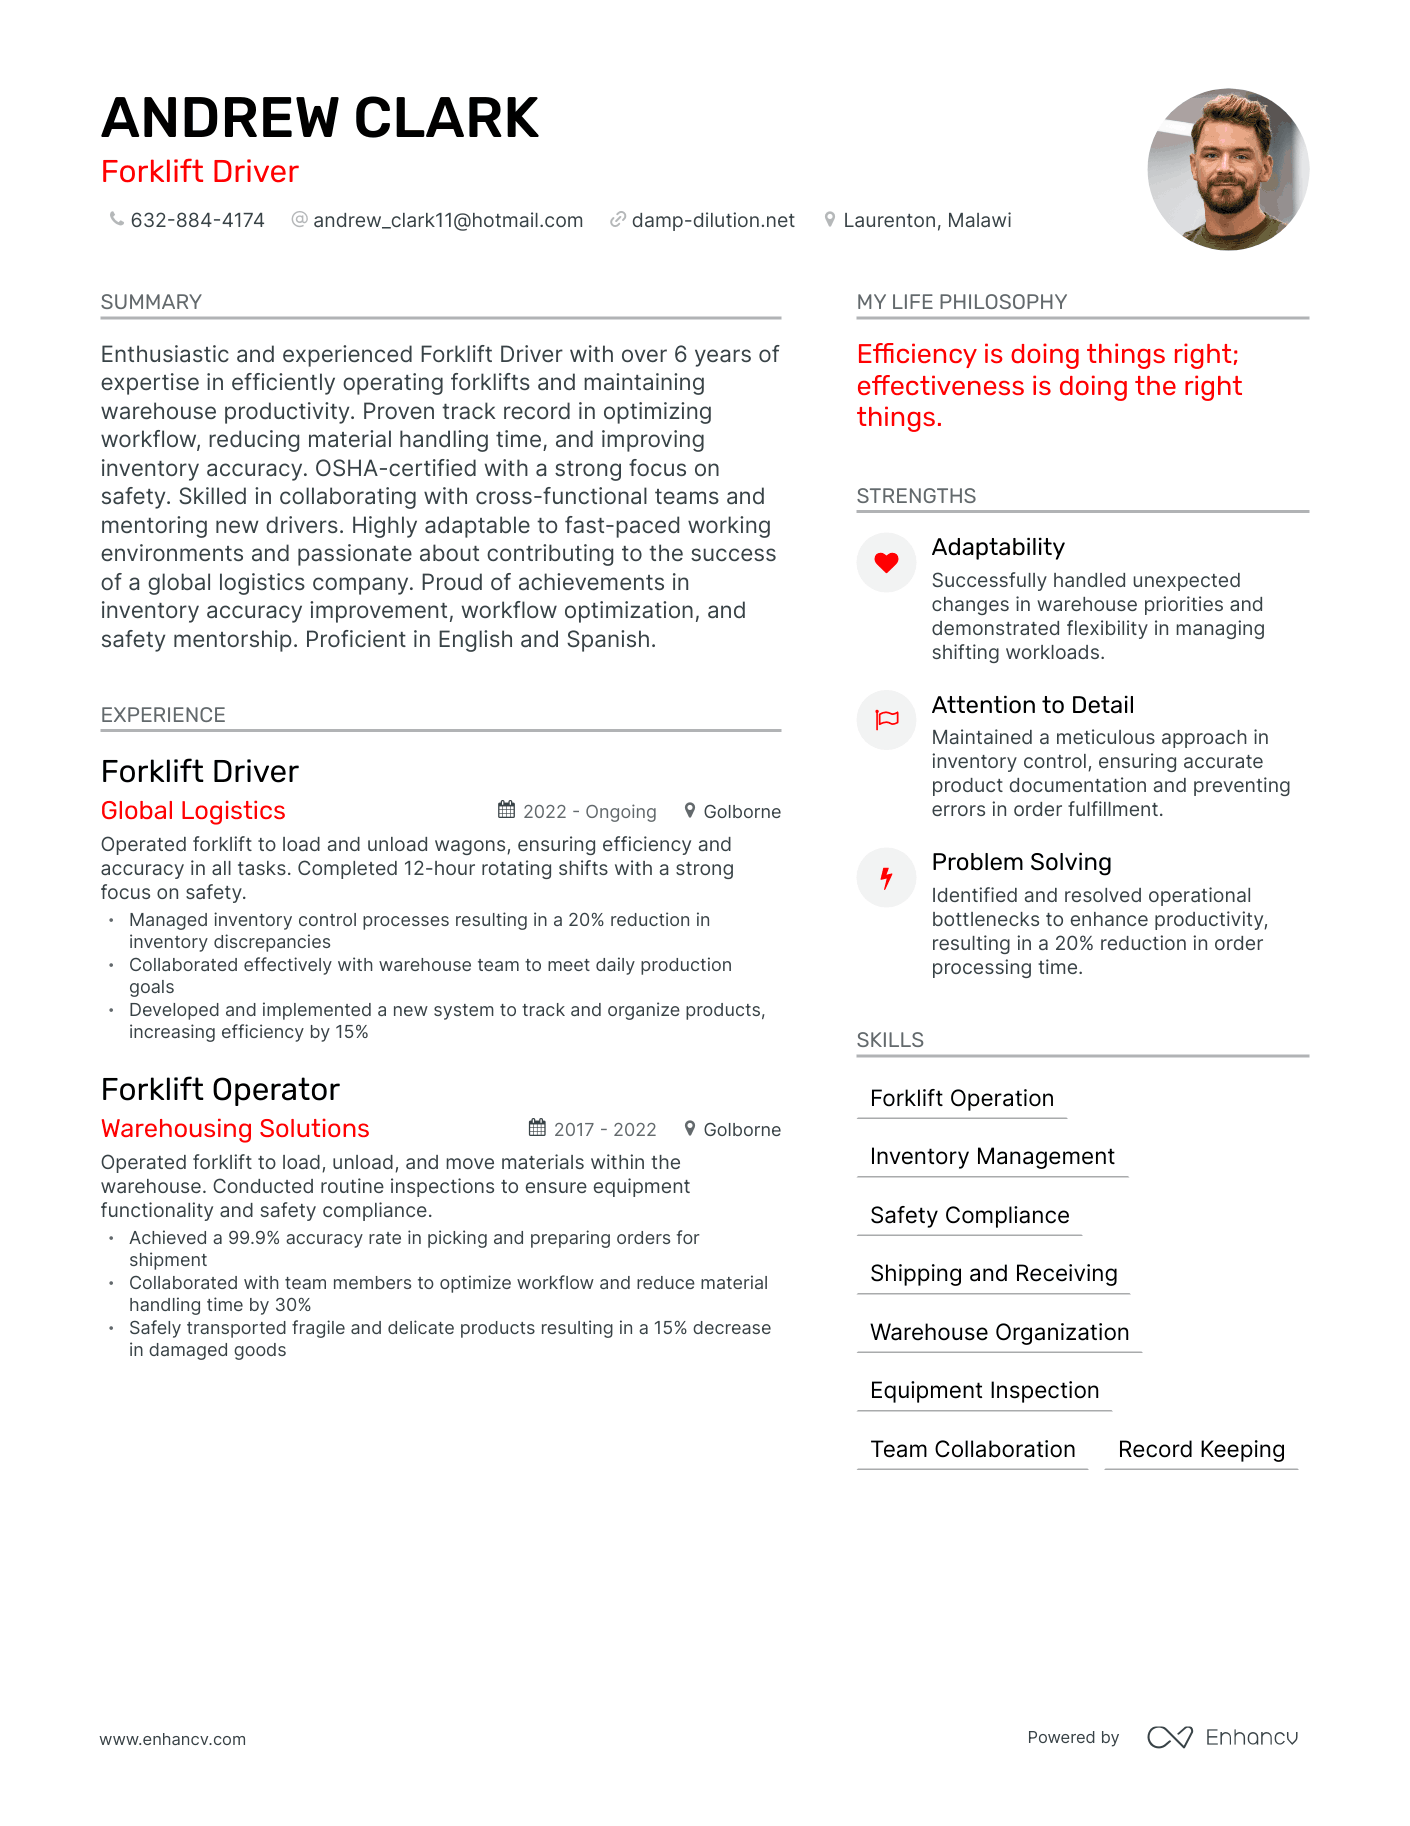 Forklift Driver resume example